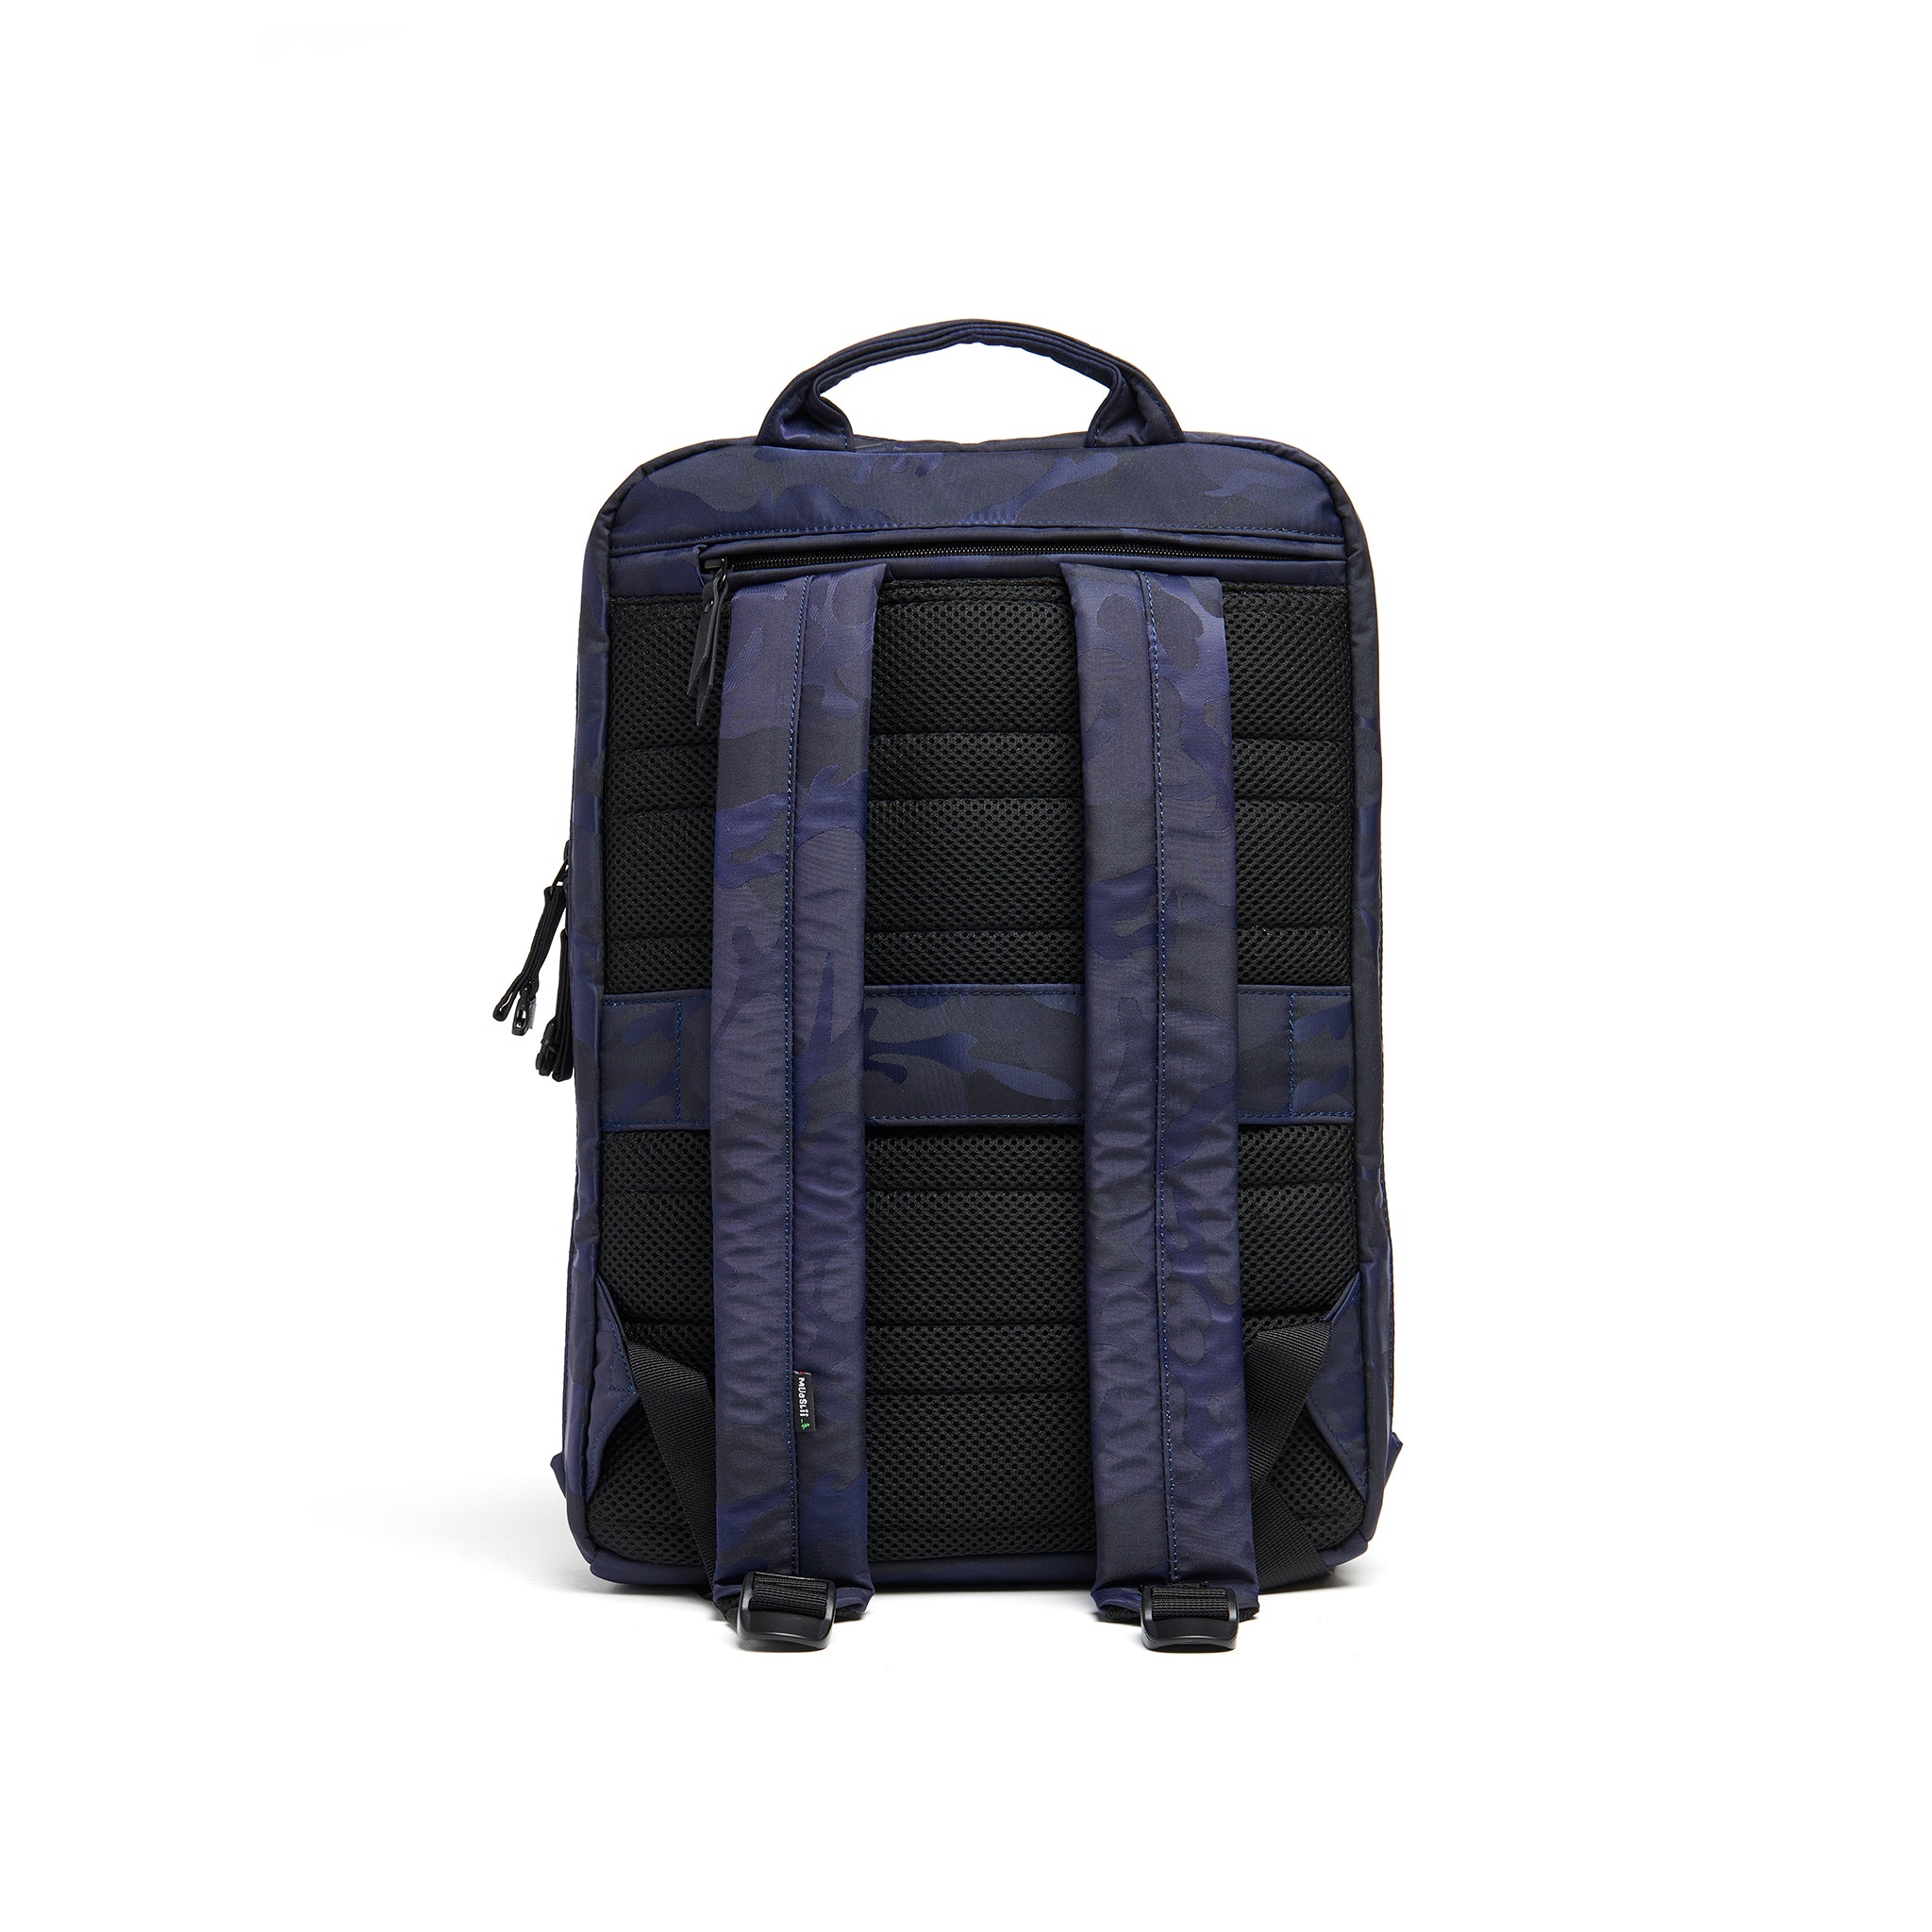 Mueslii daily backpack, made of jacquard  waterproof nylon, camouflage pattern, with a laptop compartment, color blue, back view.